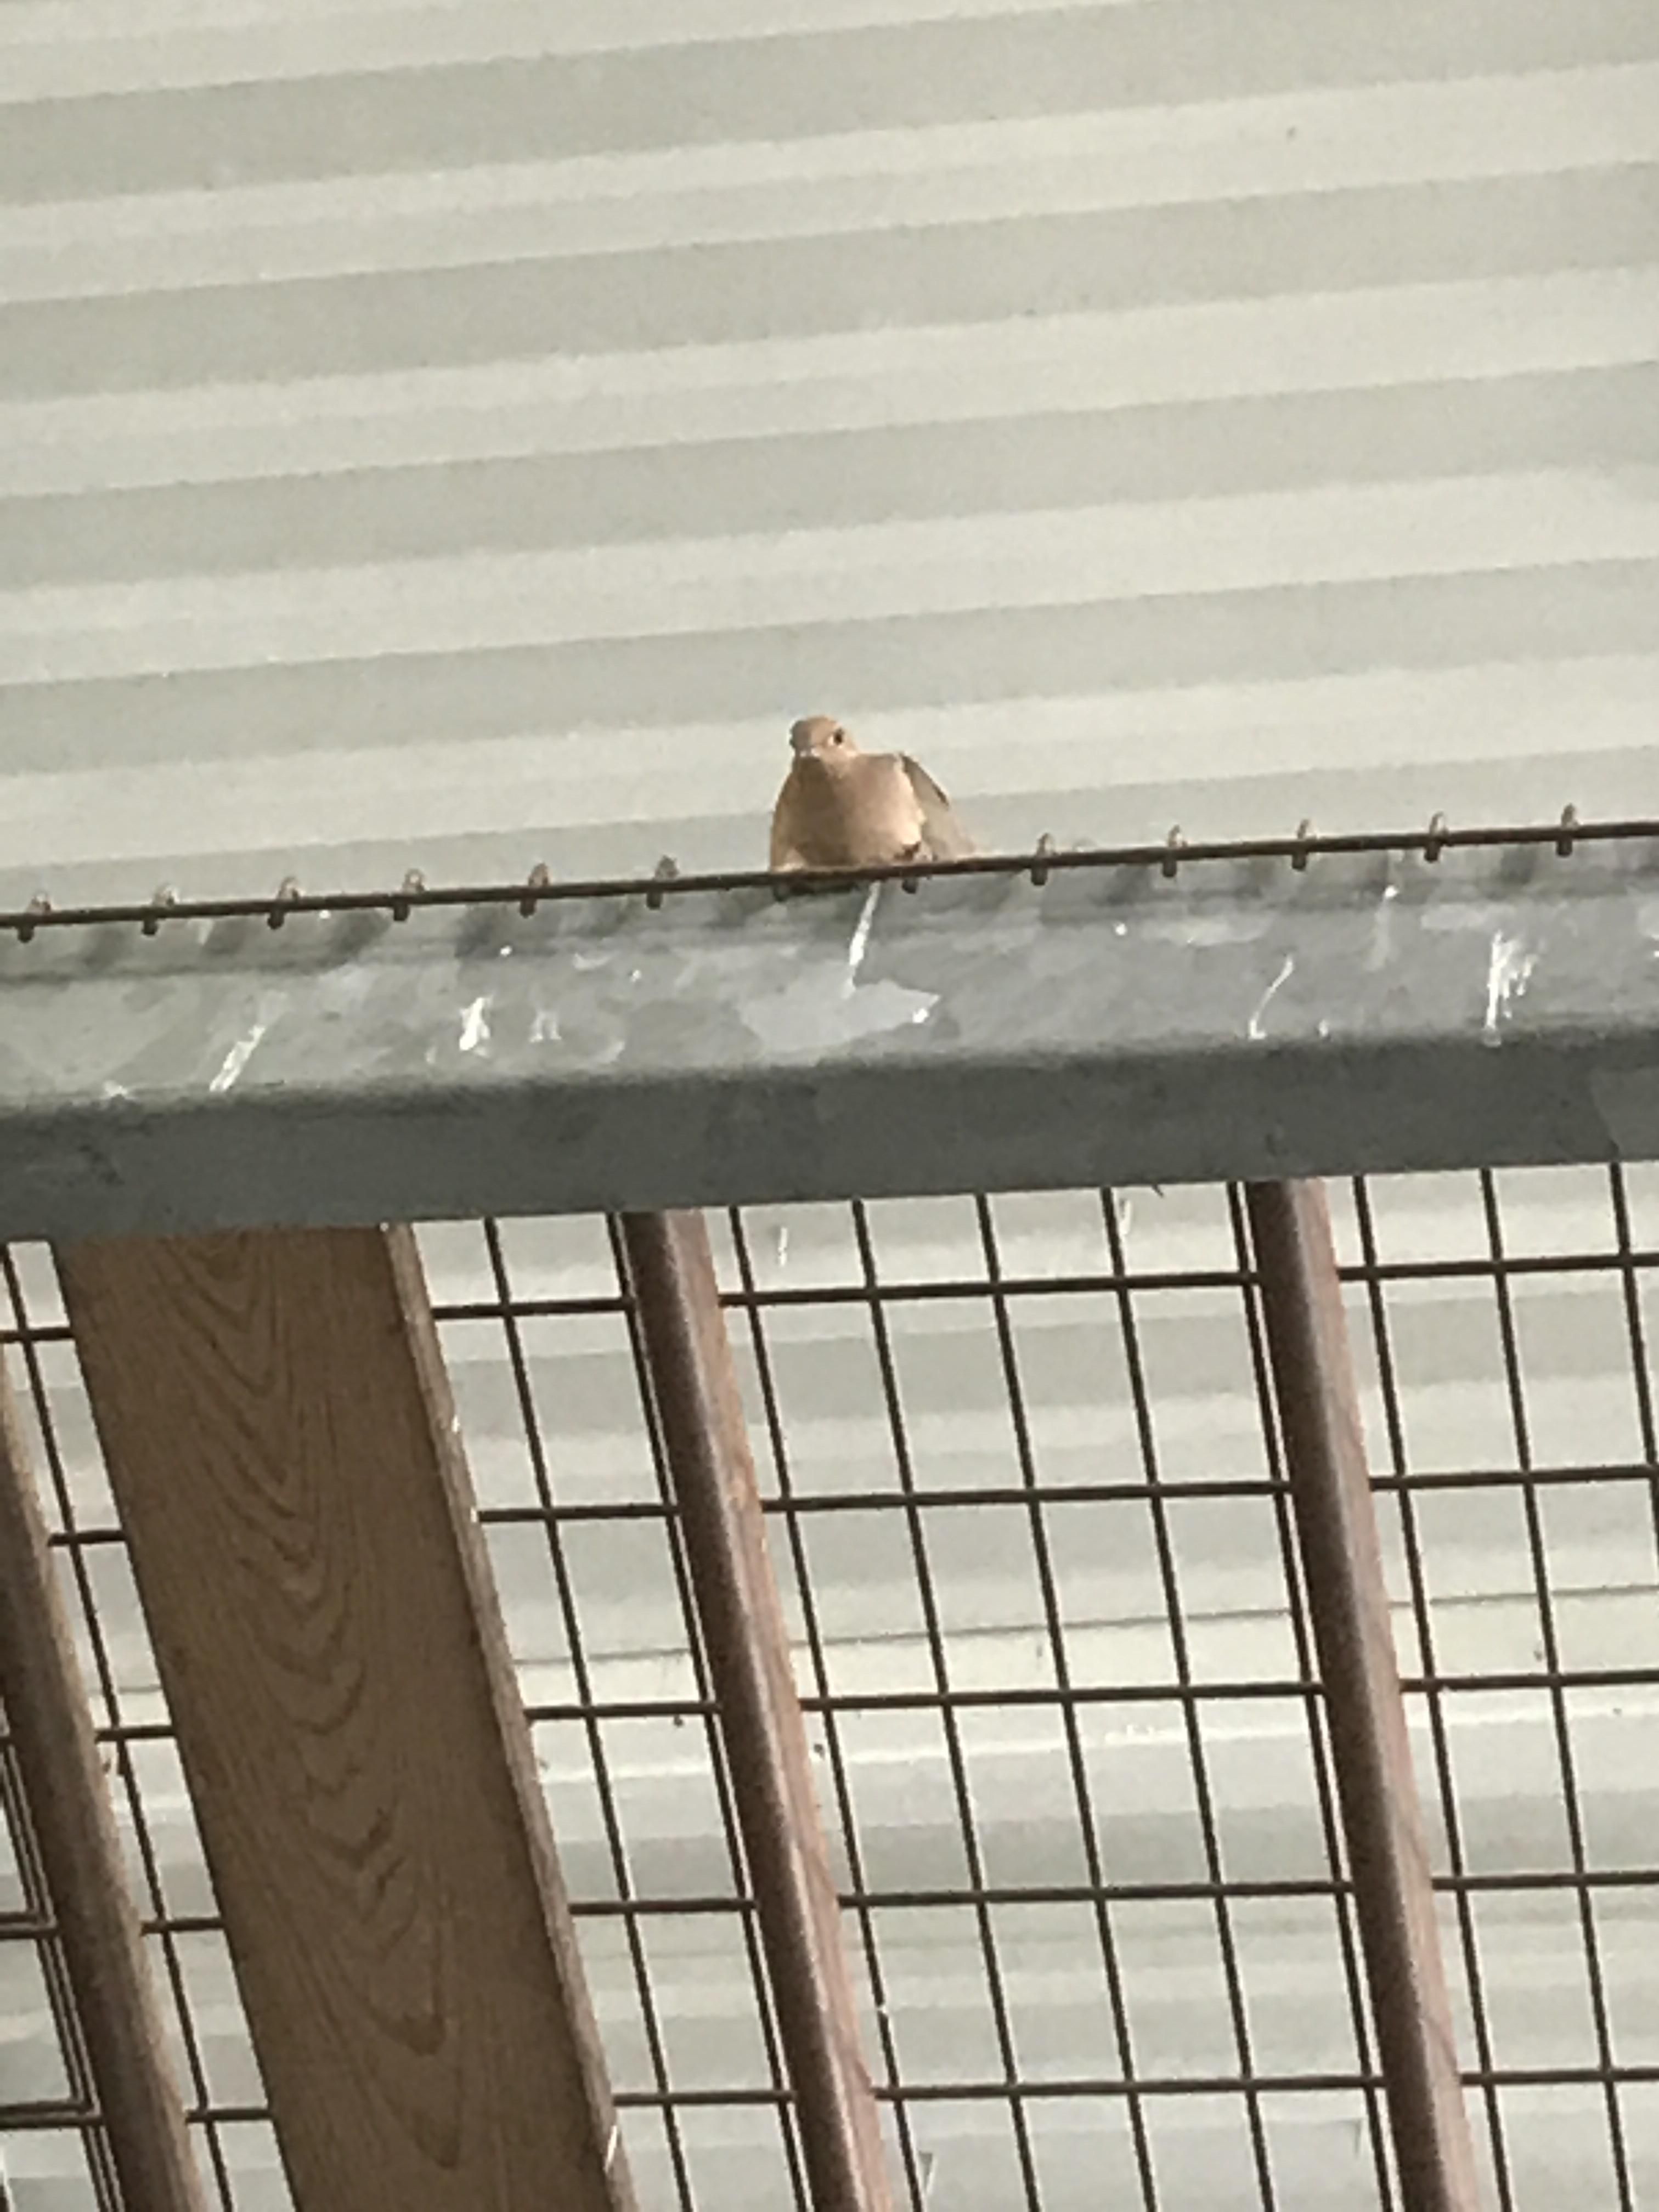 Accidentally broke its nest in a pallet with the forklift . It has been staring at me like this for four hours now and hasn't moved or blinked.